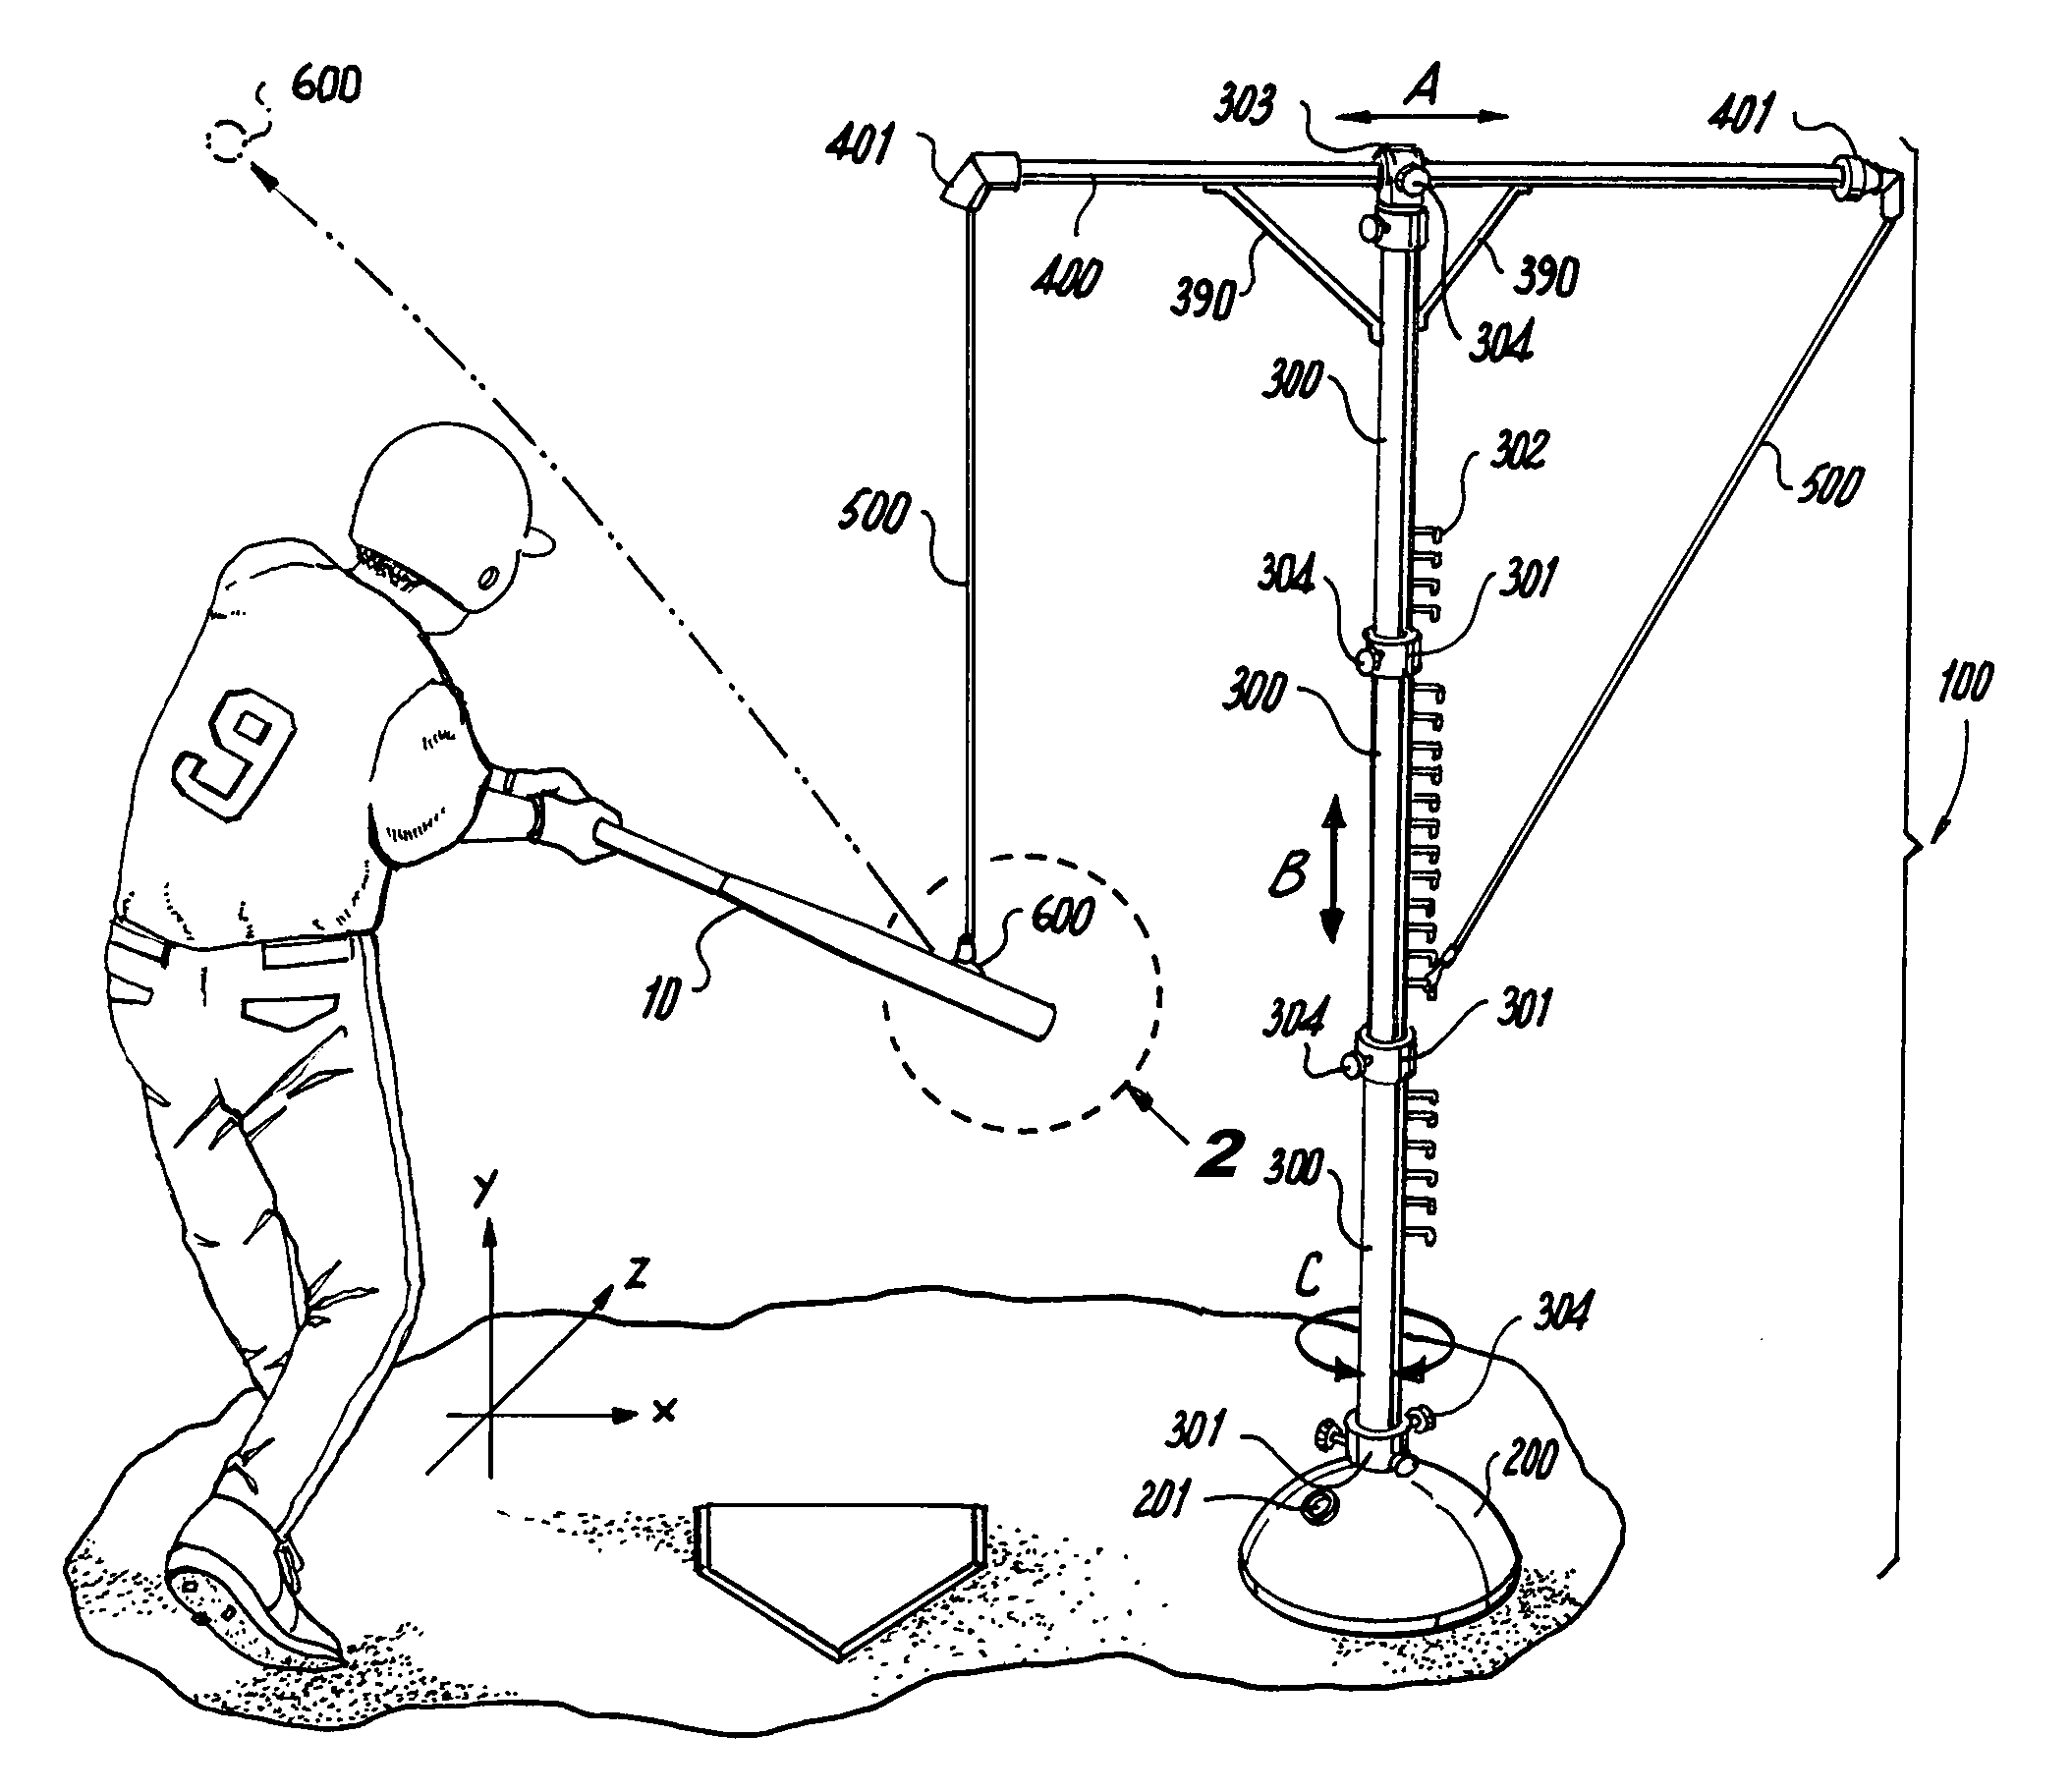 Ball hitting practice device and ball